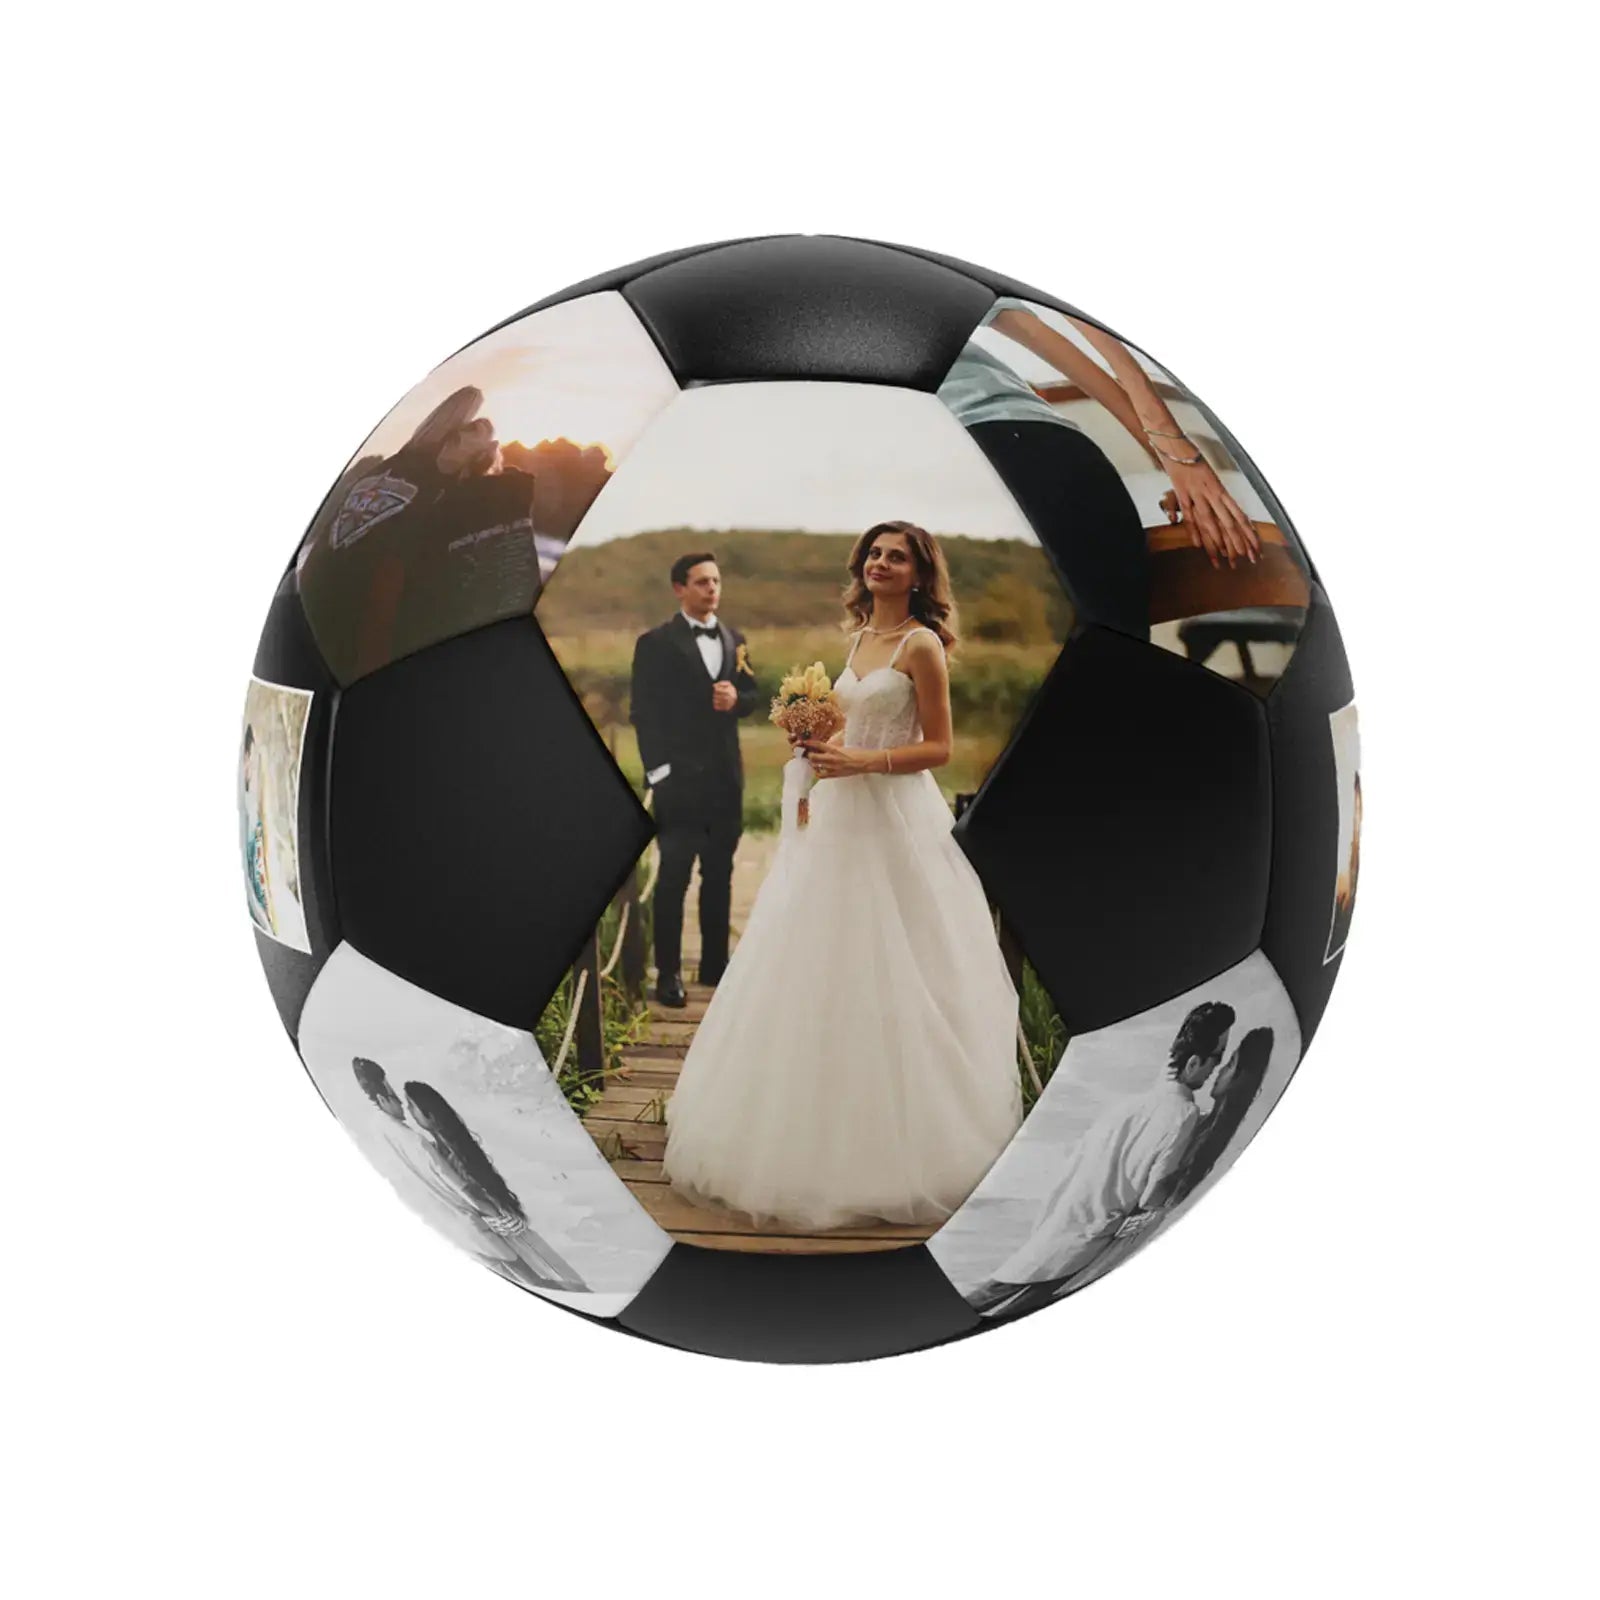 Personalized Custom Soccer Ball Gift Size 5 - Family Watchs